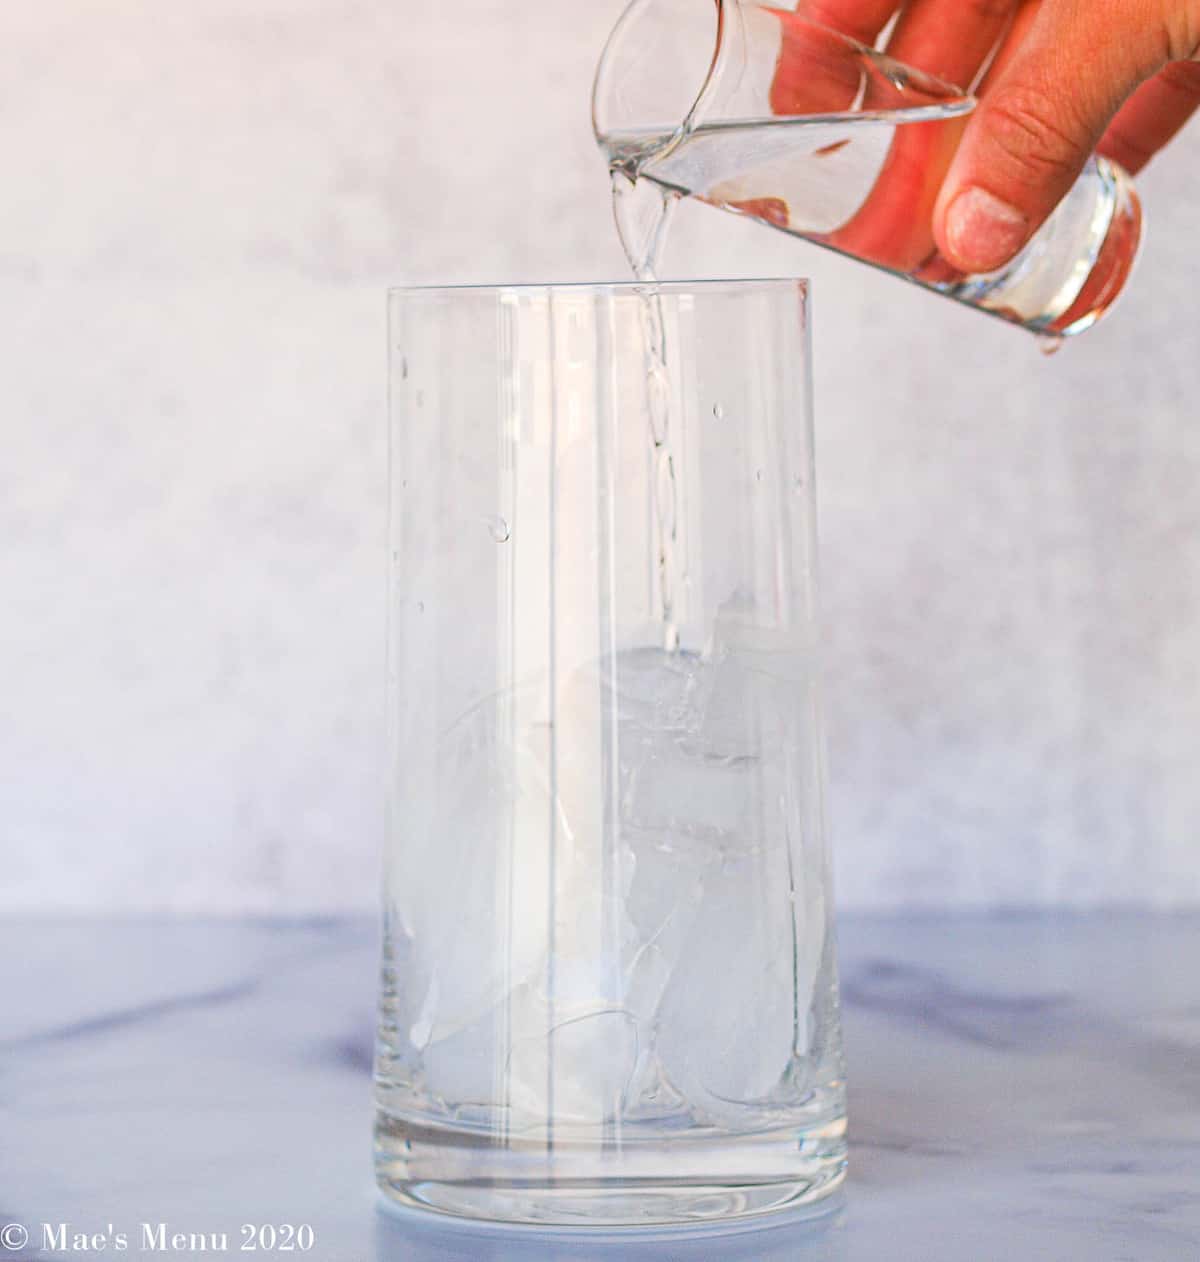 Pouring a shot of vodka into a glass of ice